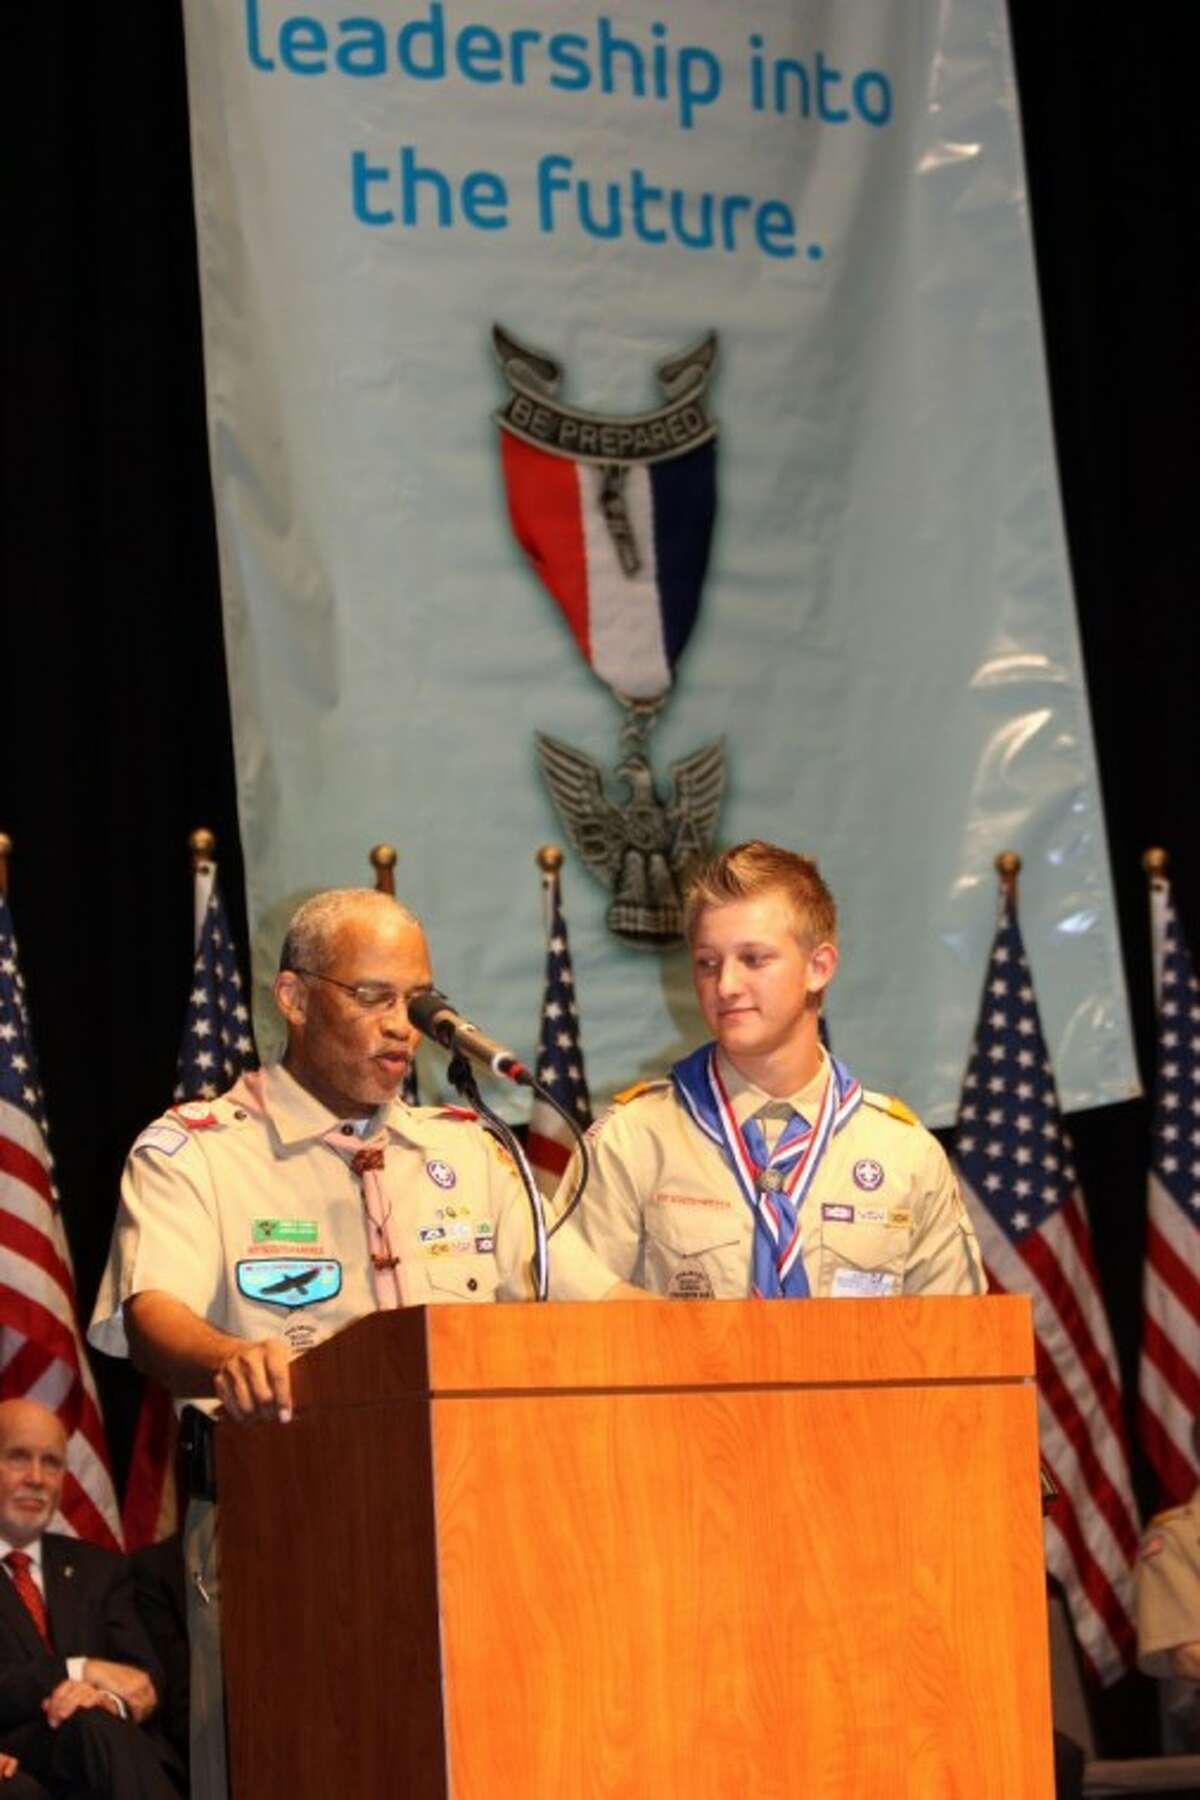 Ronald Thomas presents the Eagle Scout Service Project Award to Tyler Schild.